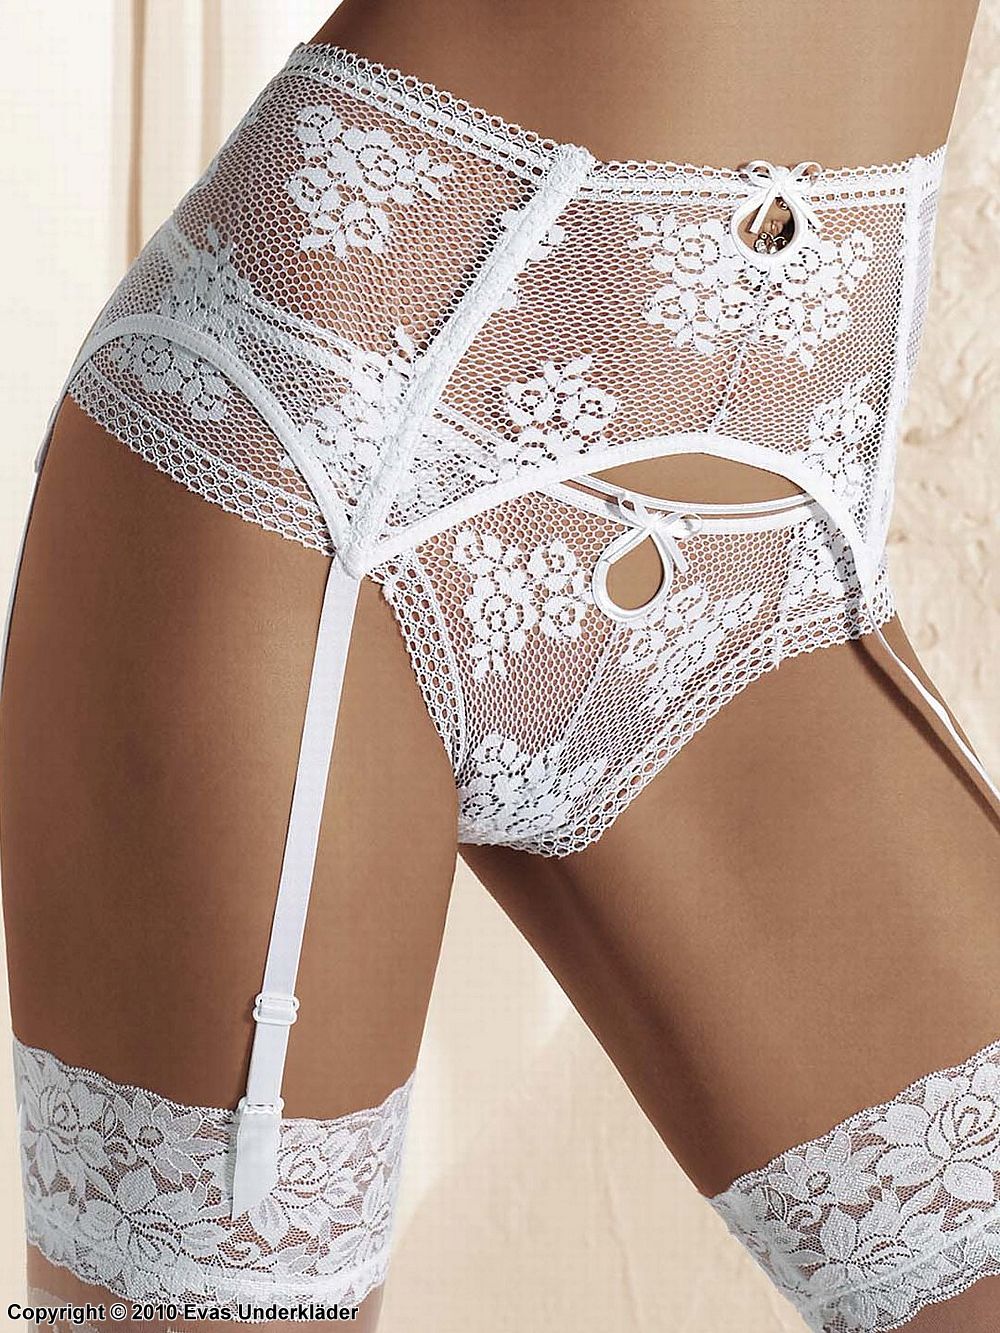 Romantic thong, openwork lace, flowers